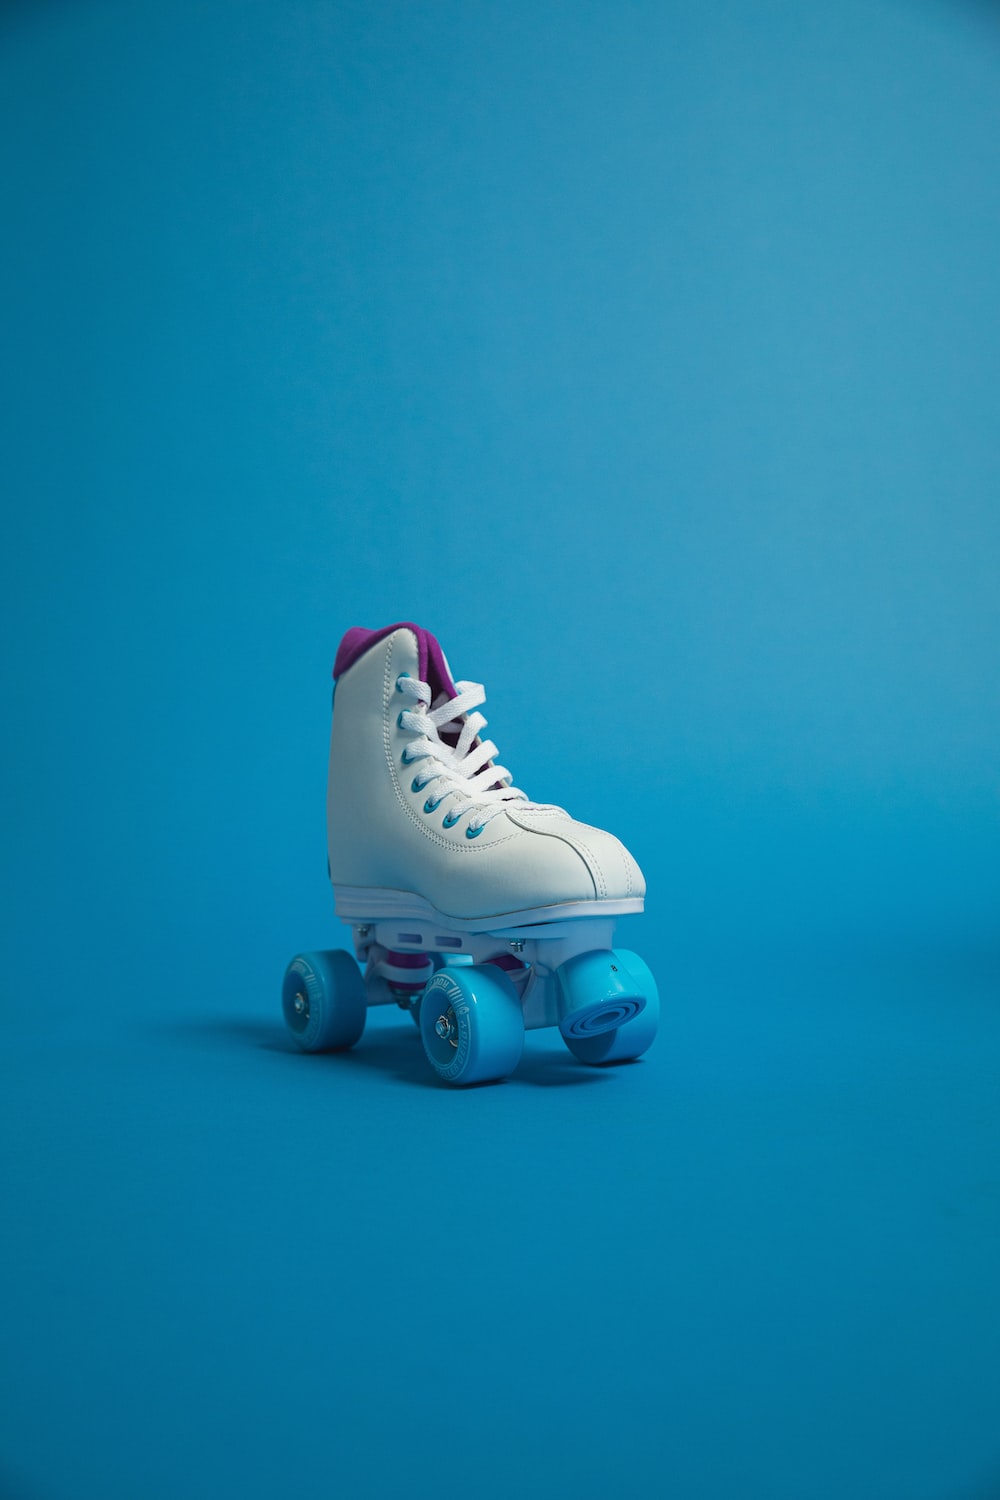 Roller skating pictures download free images on